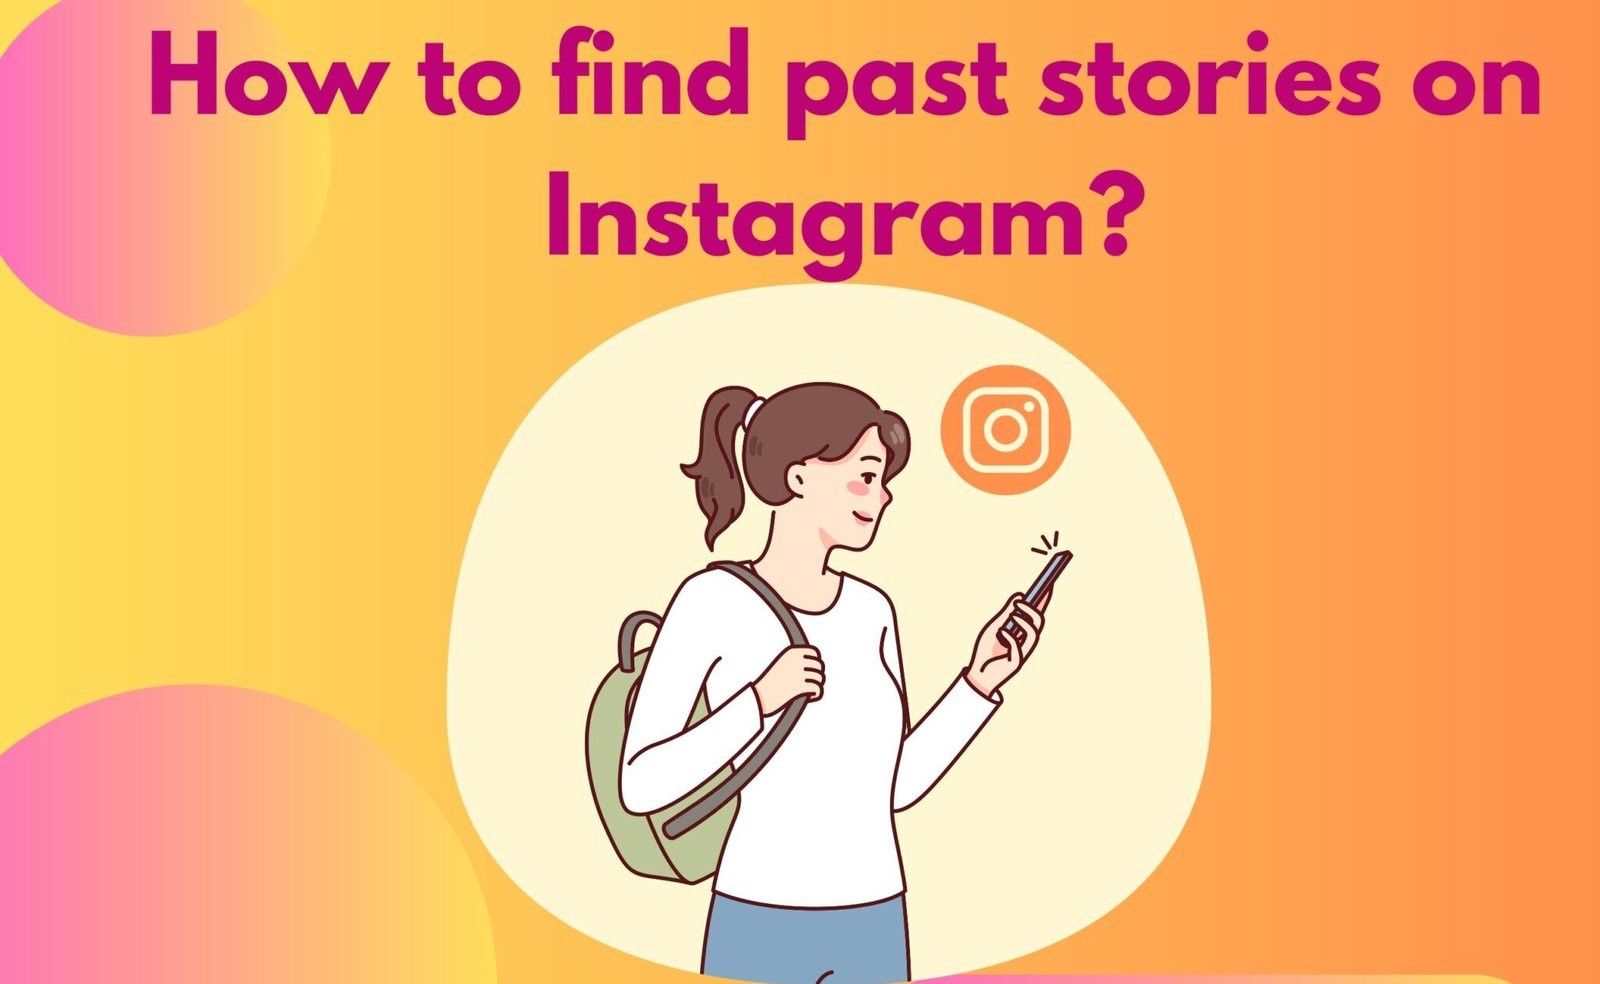 How to find past stories on Instagram